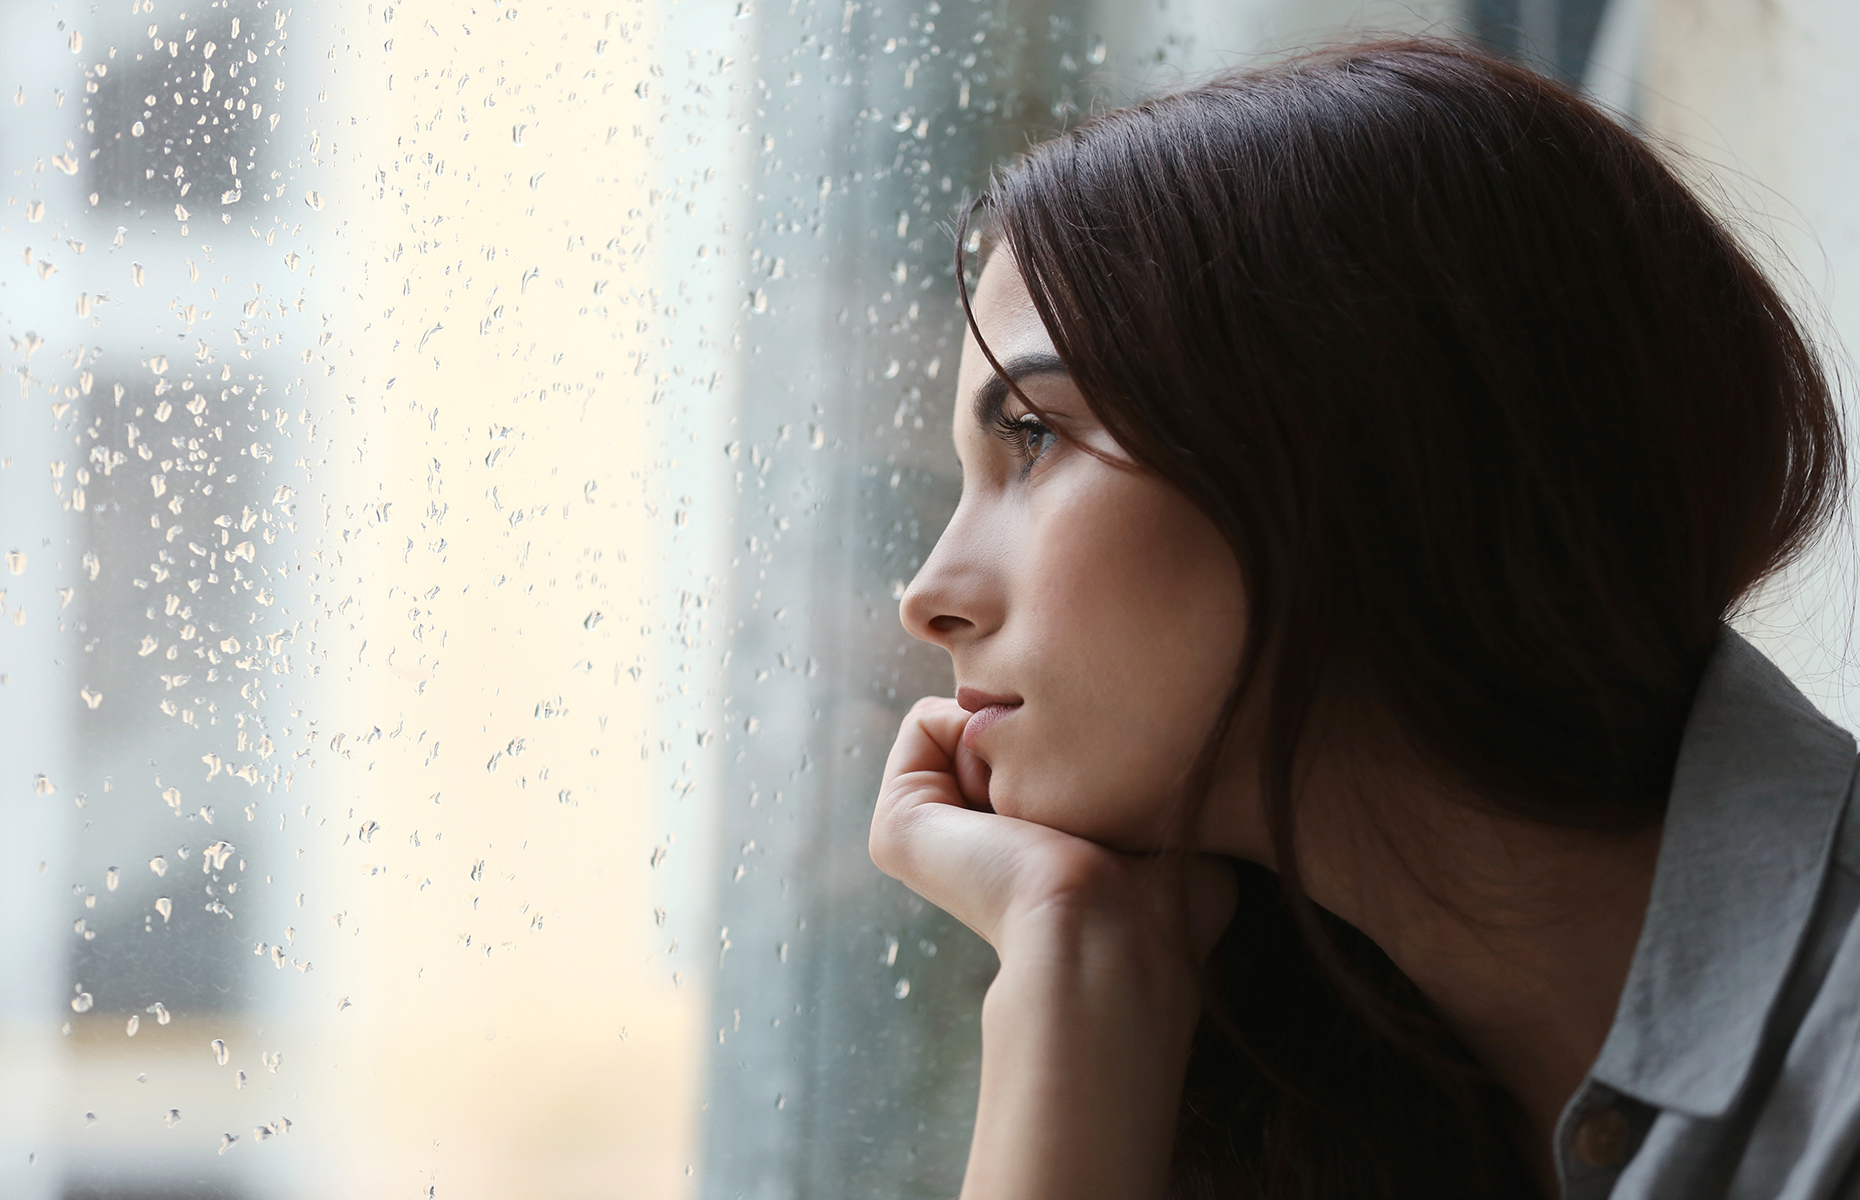 <p>Struggling with low moods? Depression could be a sign of an underactive thyroid, or hypothyroidism, according to the <a href="https://www.btf-thyroid.org/psychological-symptoms-and-thyroid-disorders">British Thyroid Foundation</a>. Of course, there could be many underlying reasons for your mental health complaint. It’s important to find out the cause and work with a medical professional on what to do next.</p>